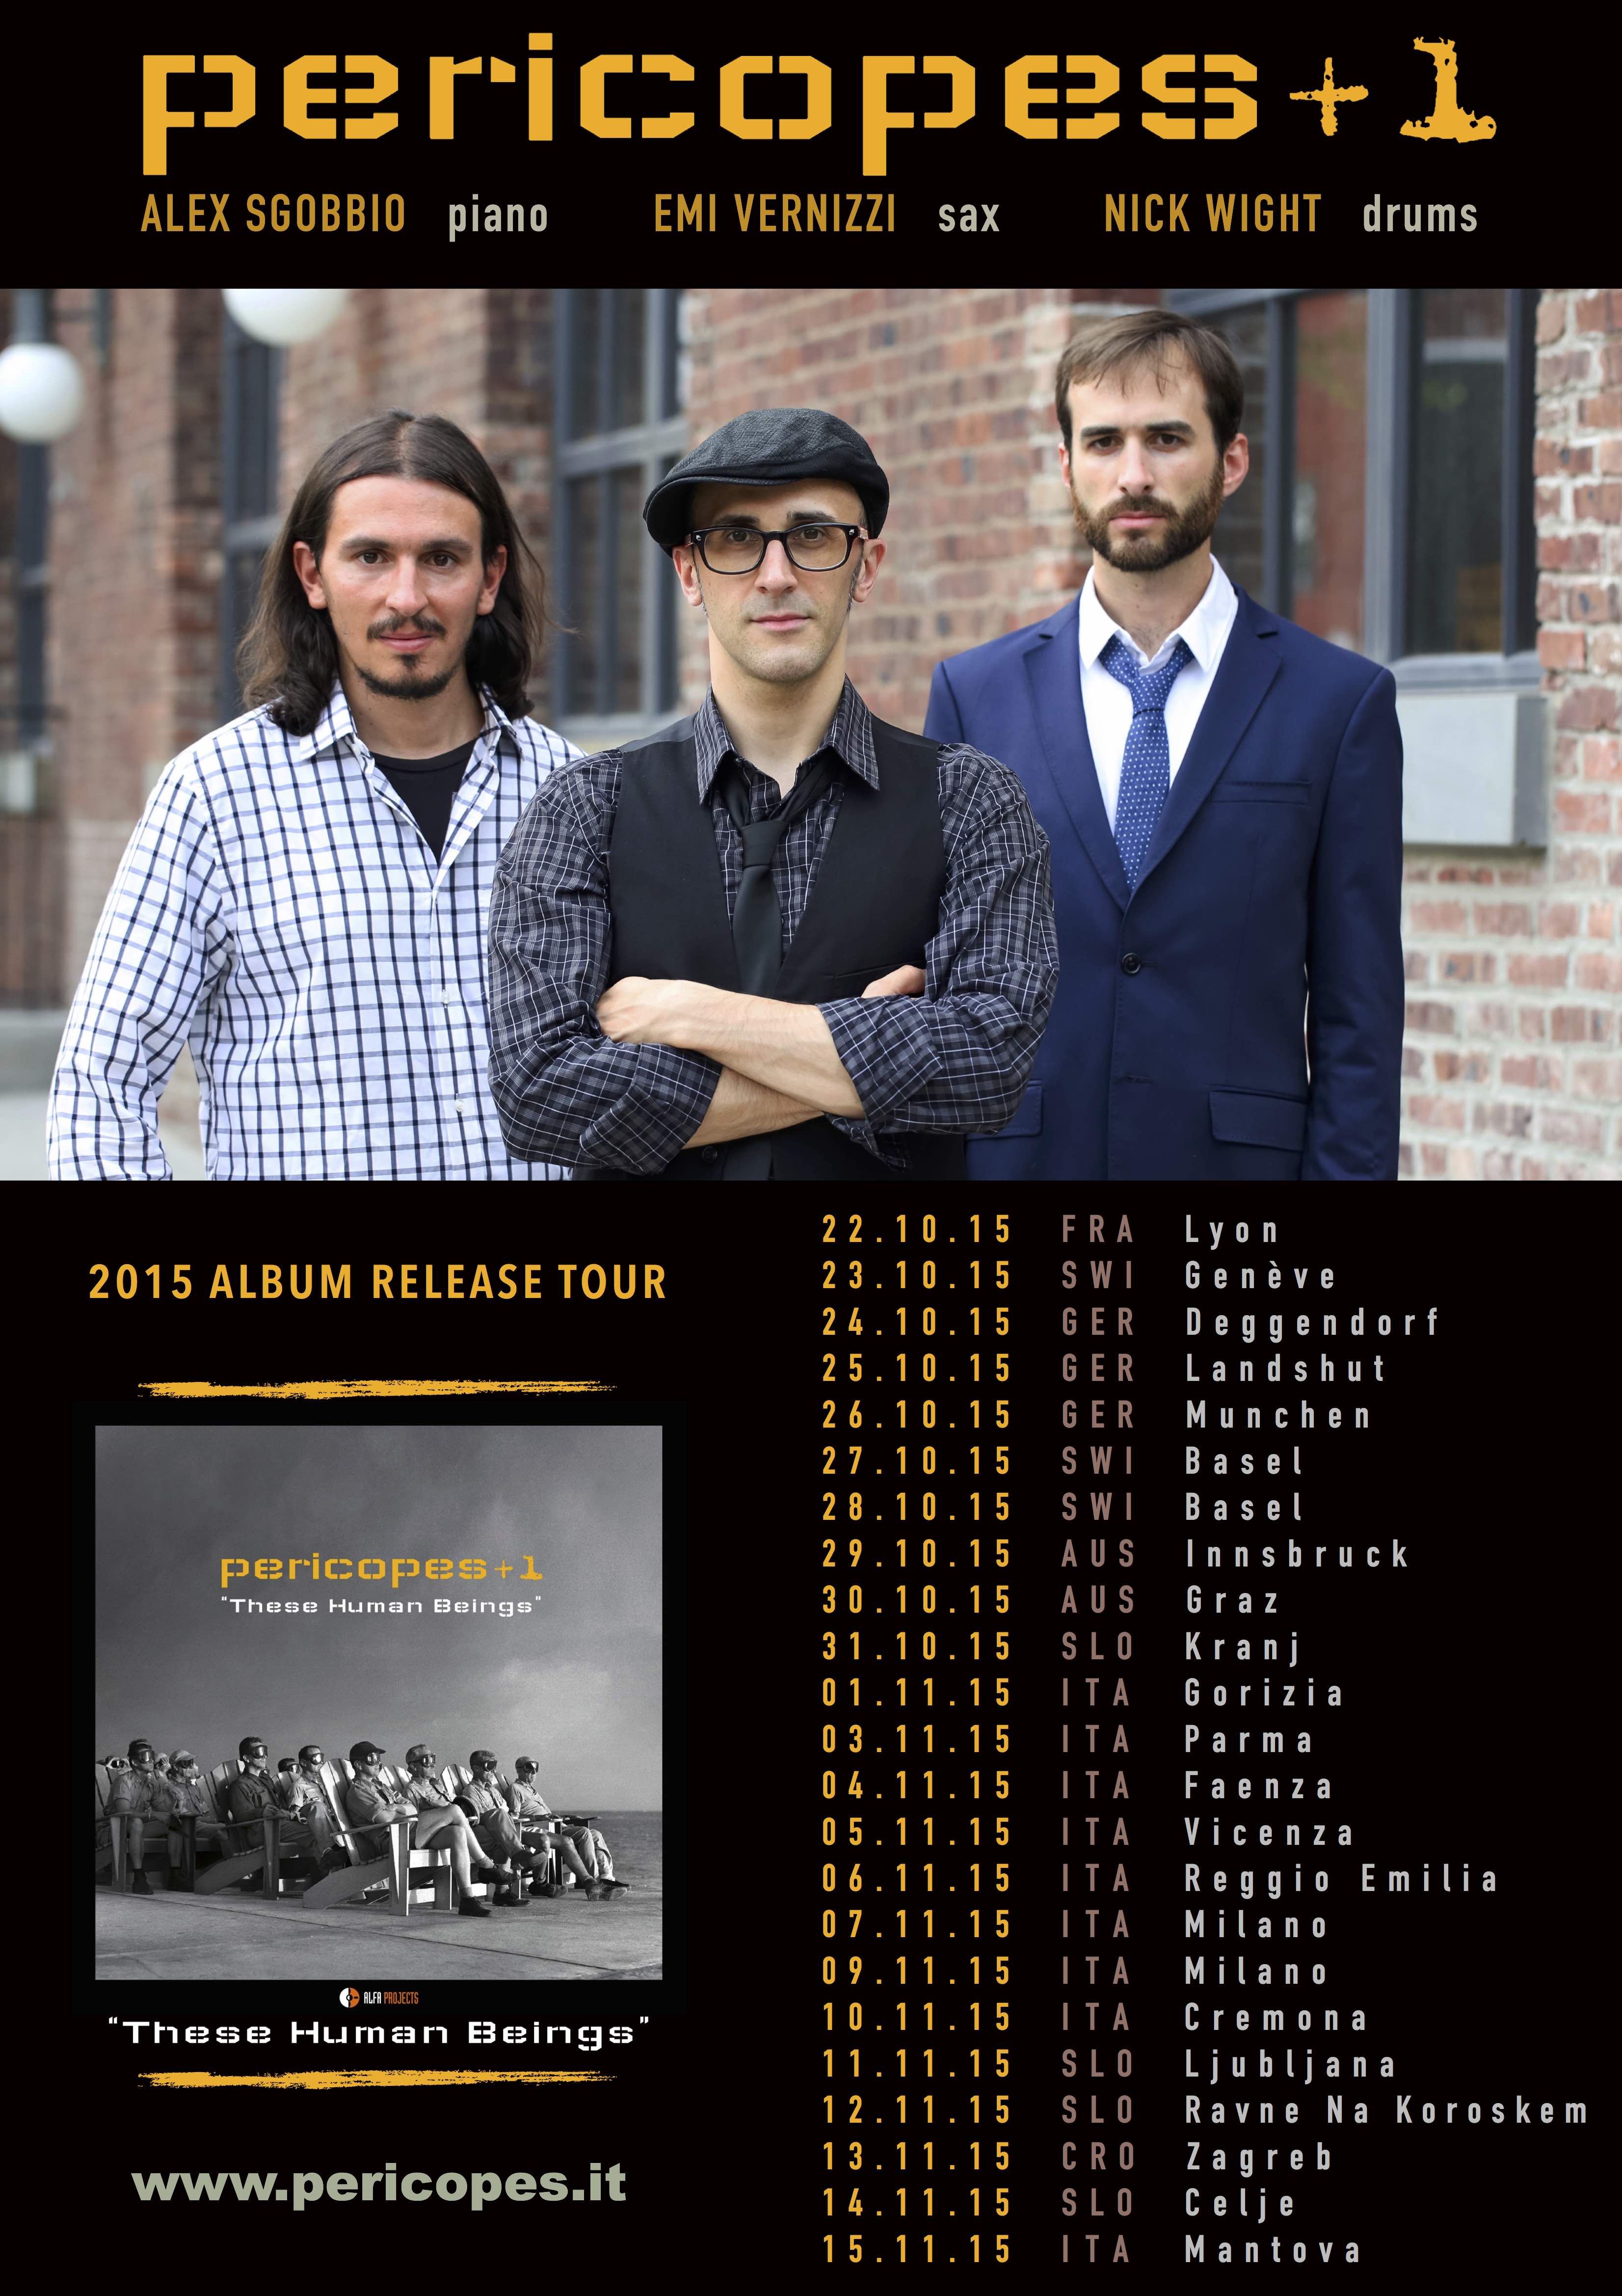 Pericopes - These Human Beings - Album Release Tour 2015 facebook